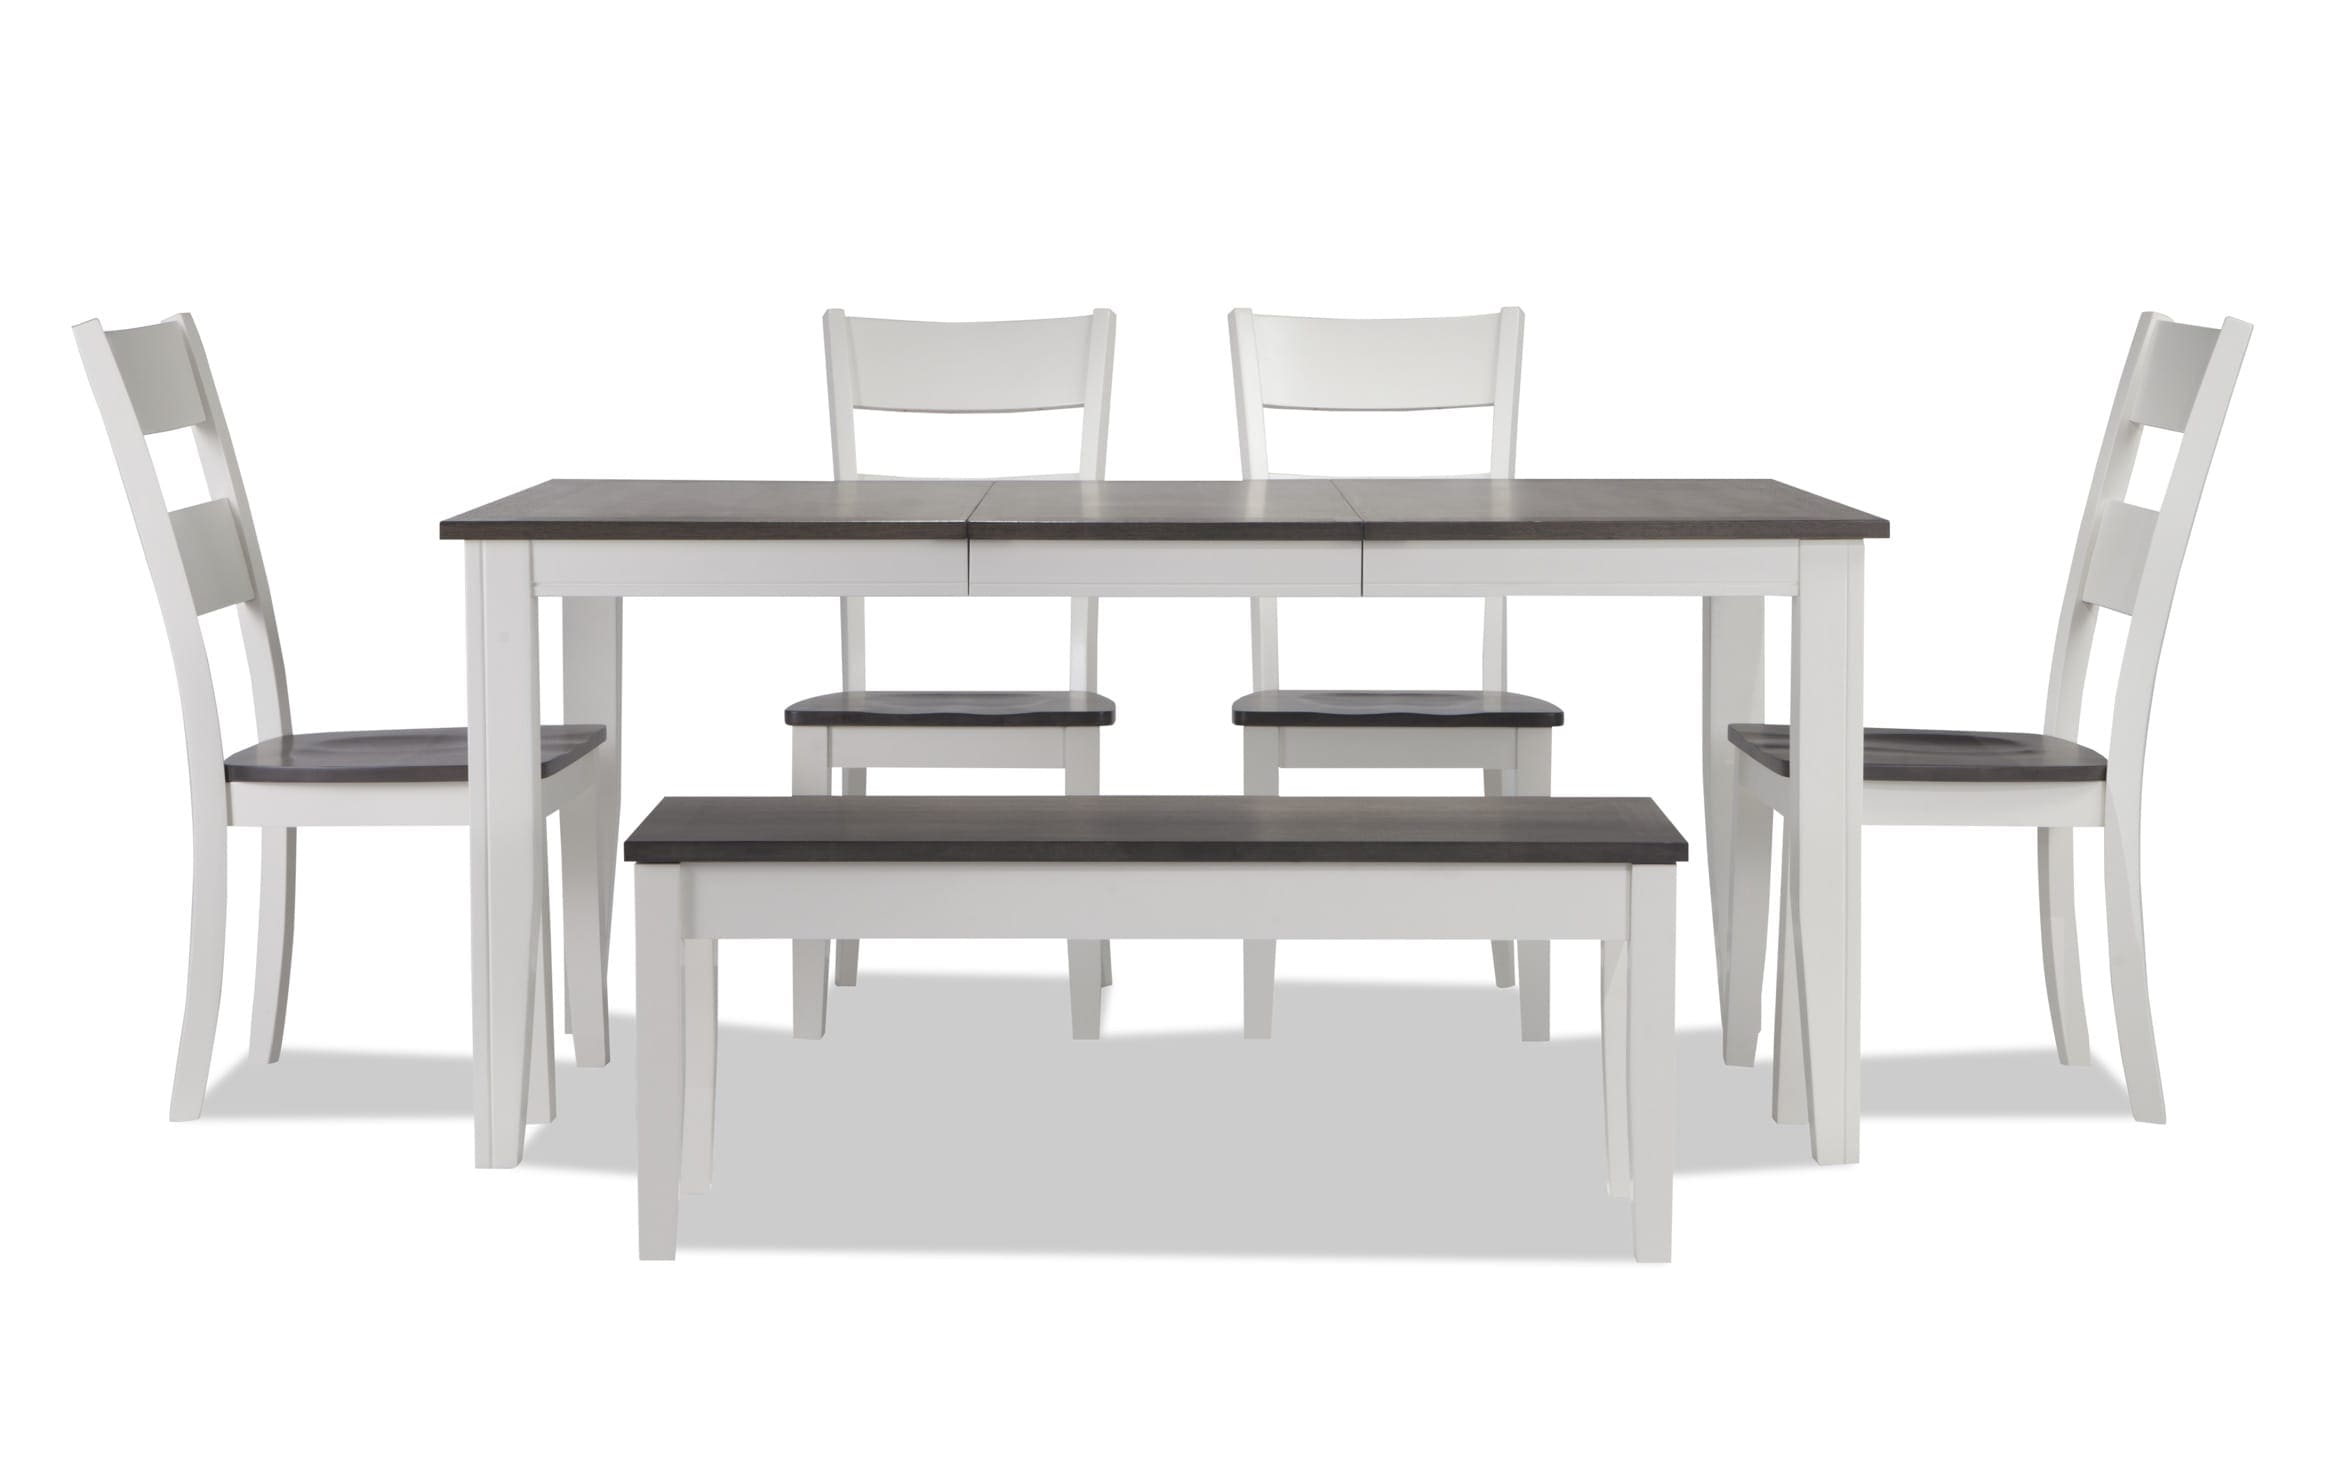 Blake Gray White 6 Piece Dining Set, Bobs Furniture Dining Room Table And Chairs